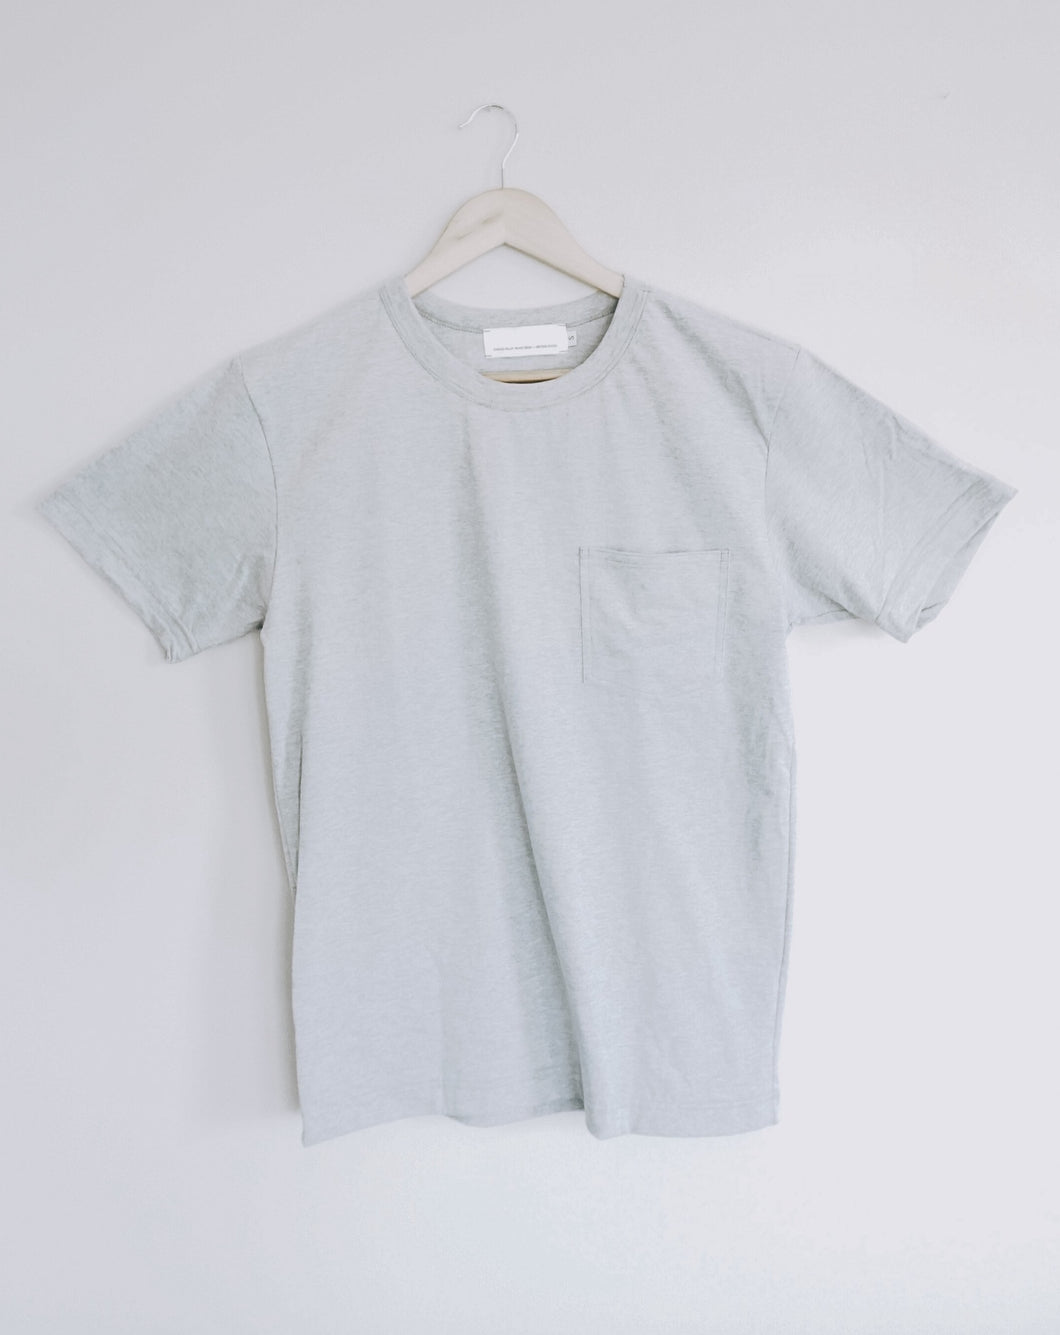 Standard Issue Core Tee in Heather Grey